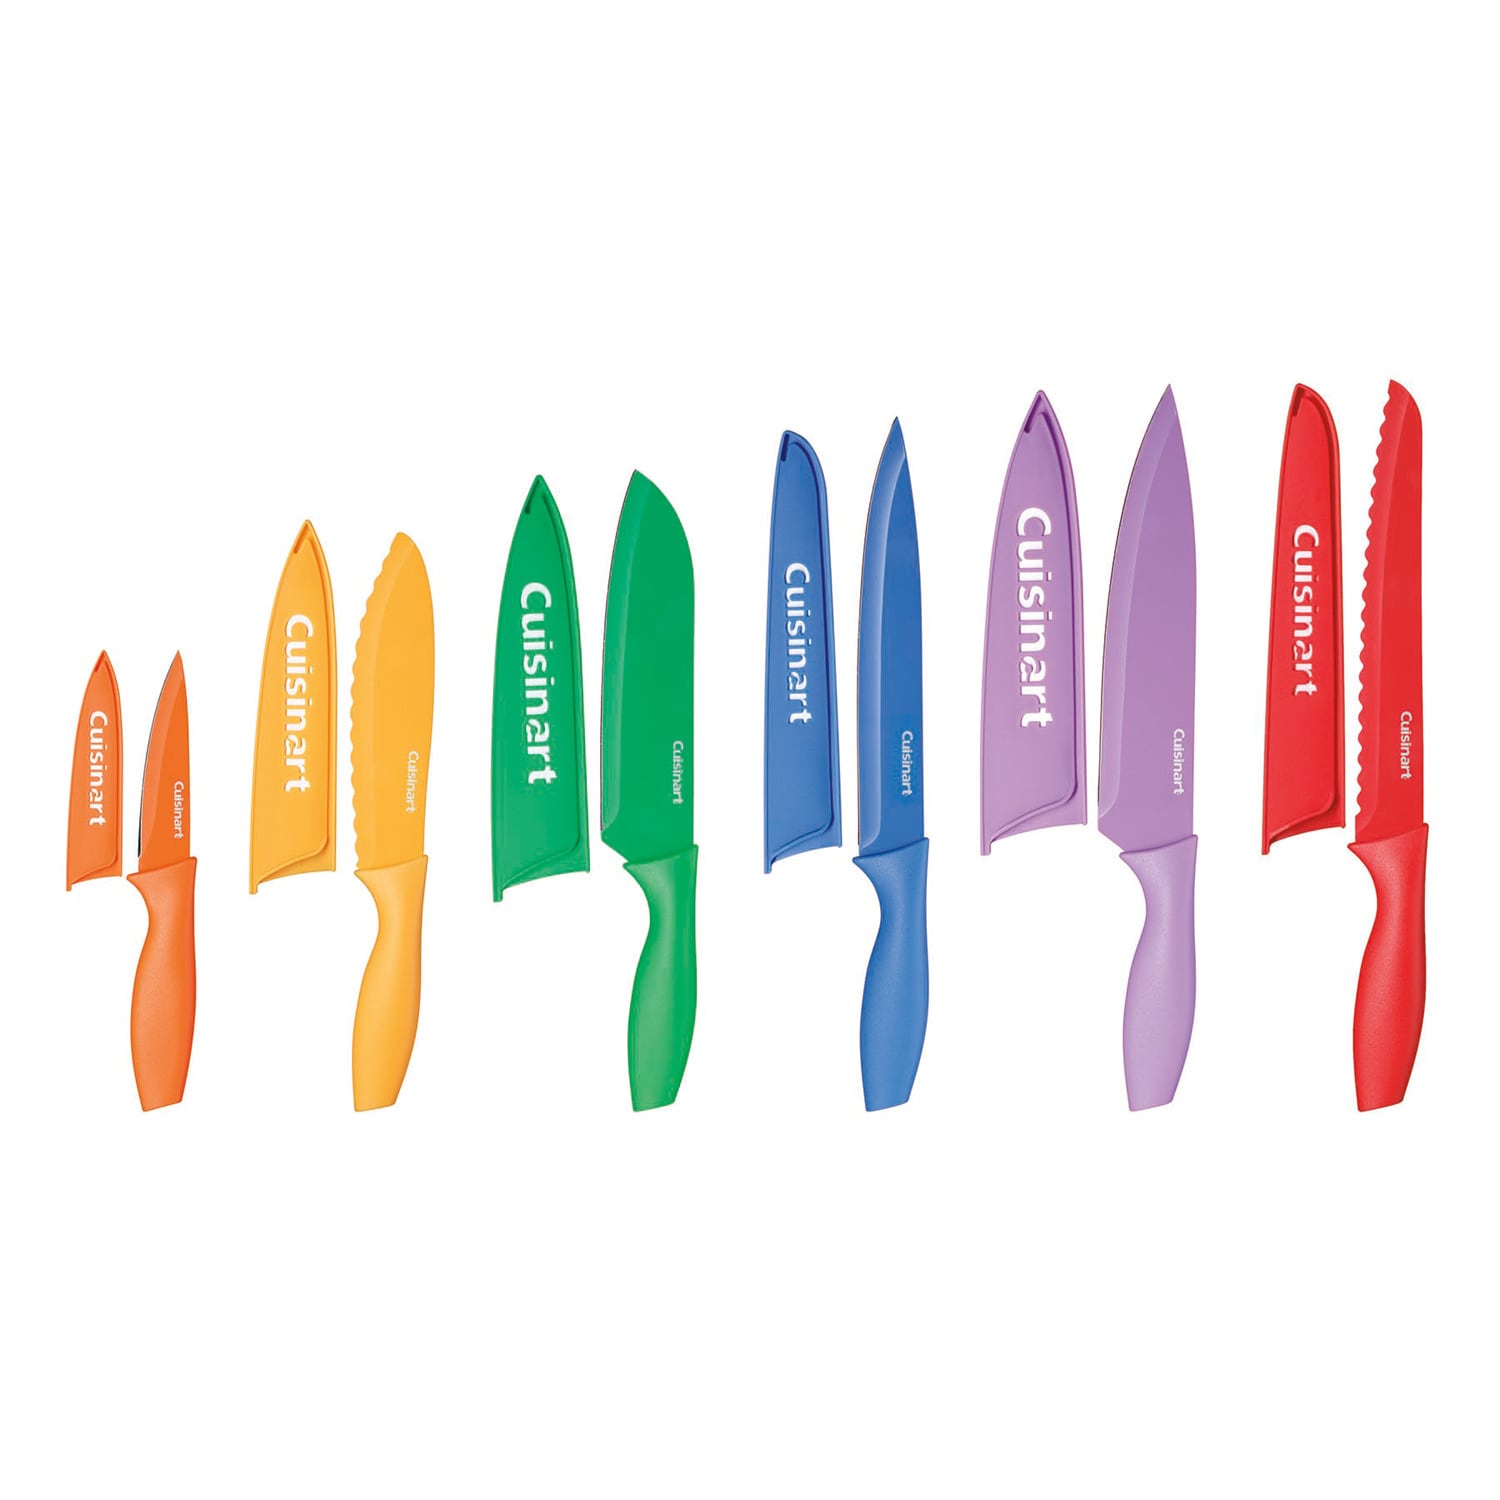 Cuisinart C55-01-12PCKS 12-Piece Color Knife Set with Blade Guards